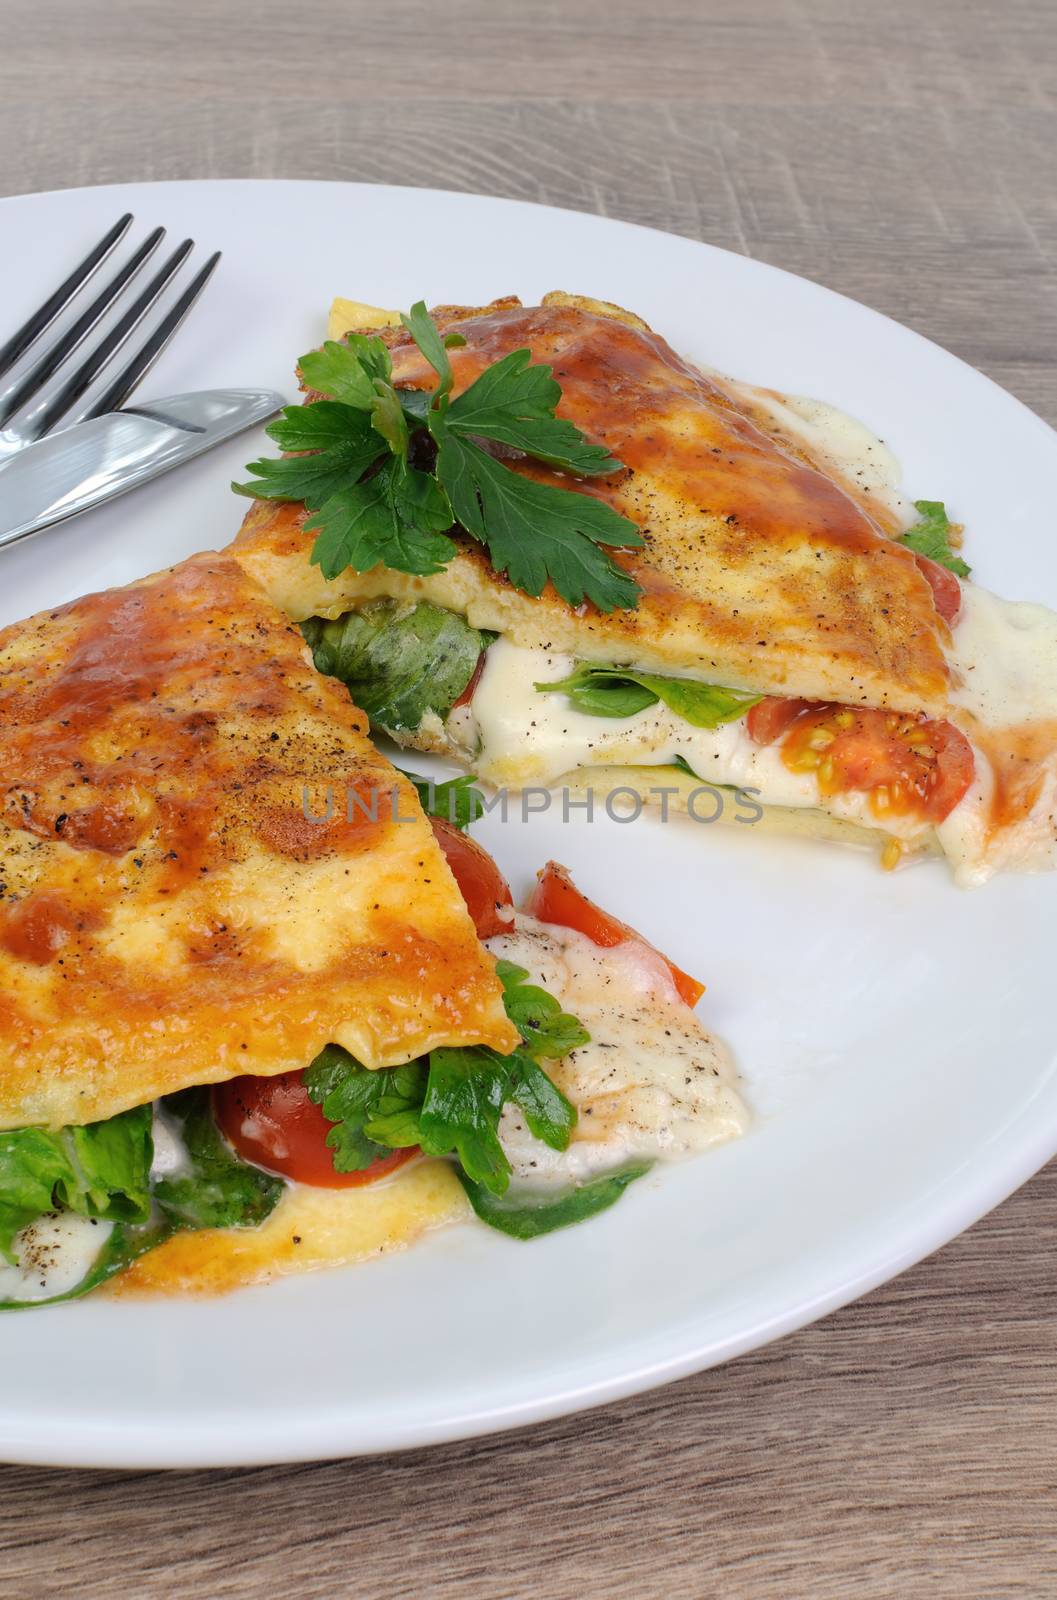 Omelet stuffed with spinach, tomato and  mozzarella